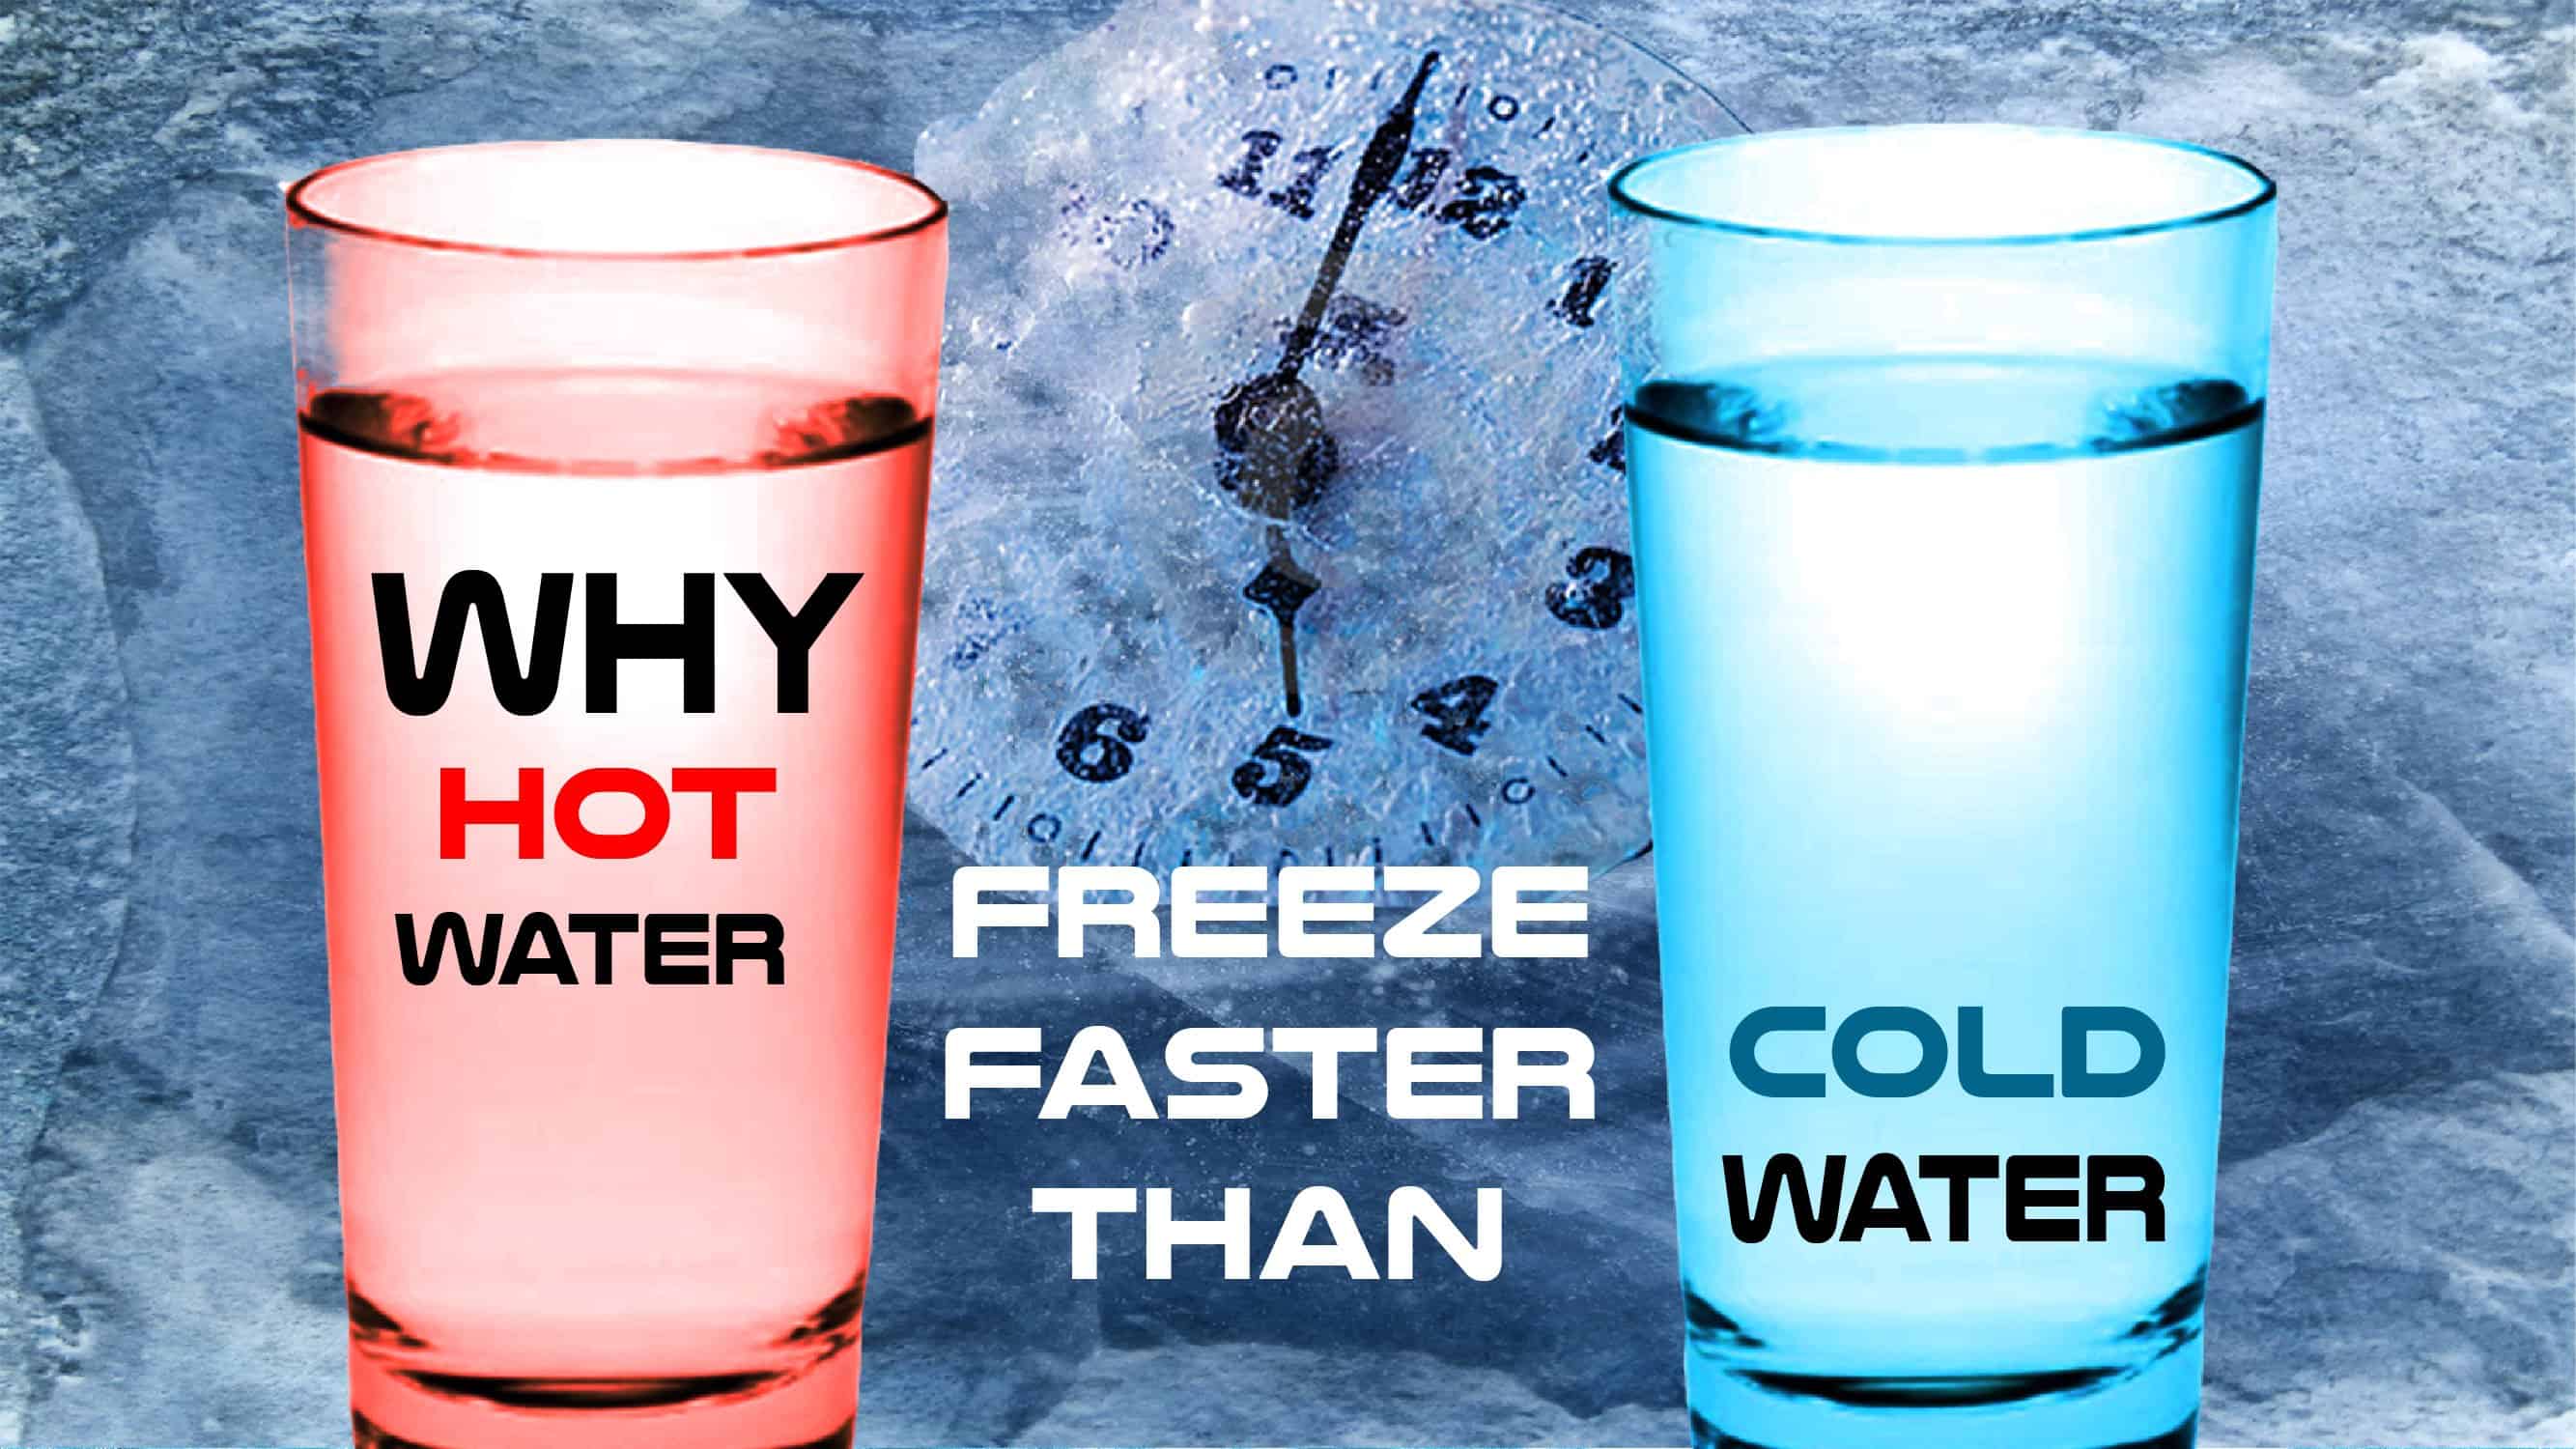 Hot Water Freezes Faster